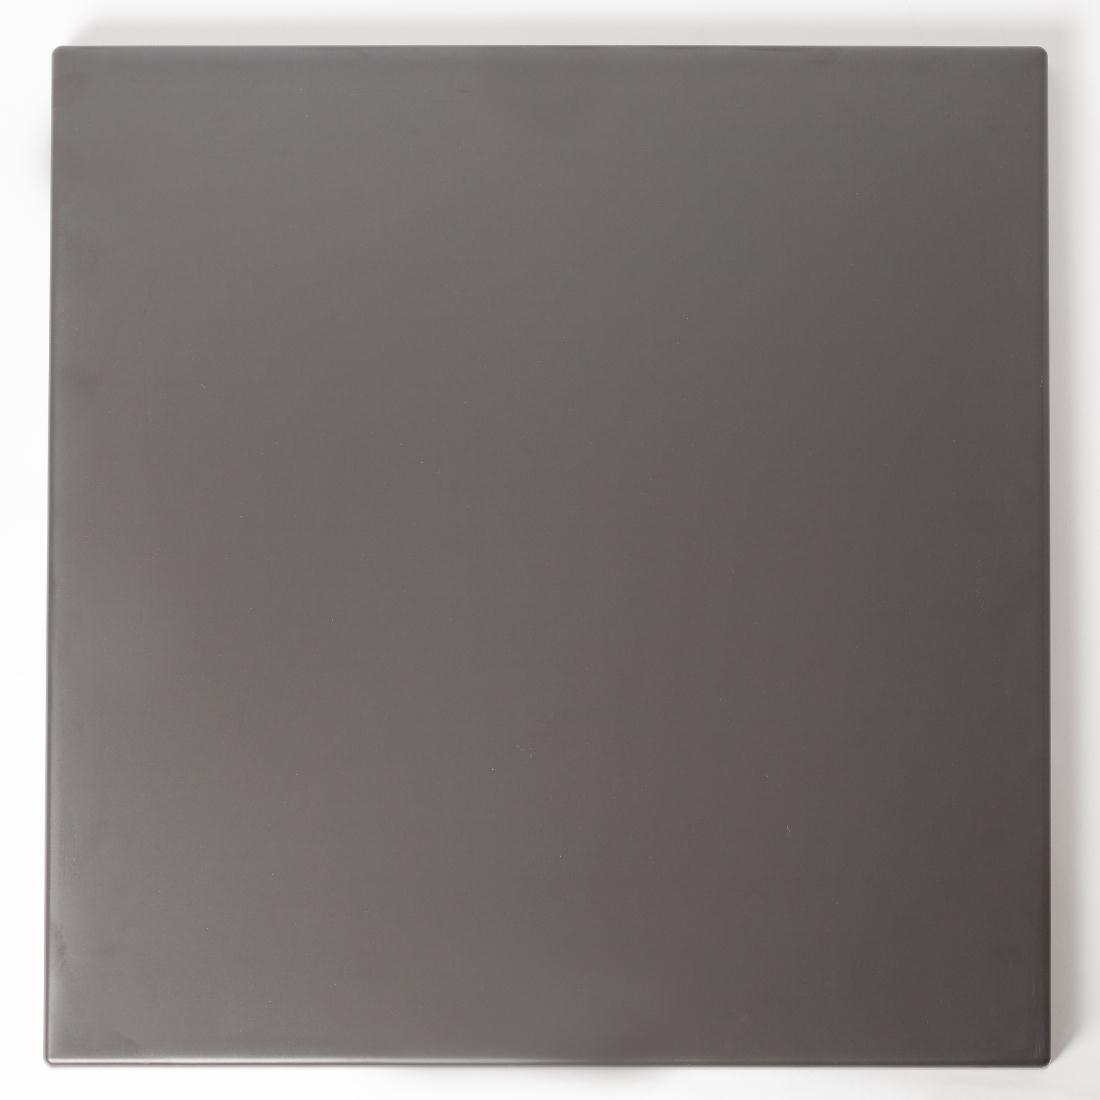 Werzalit Pre-drilled Square Table Top  Dark Grey 600mm